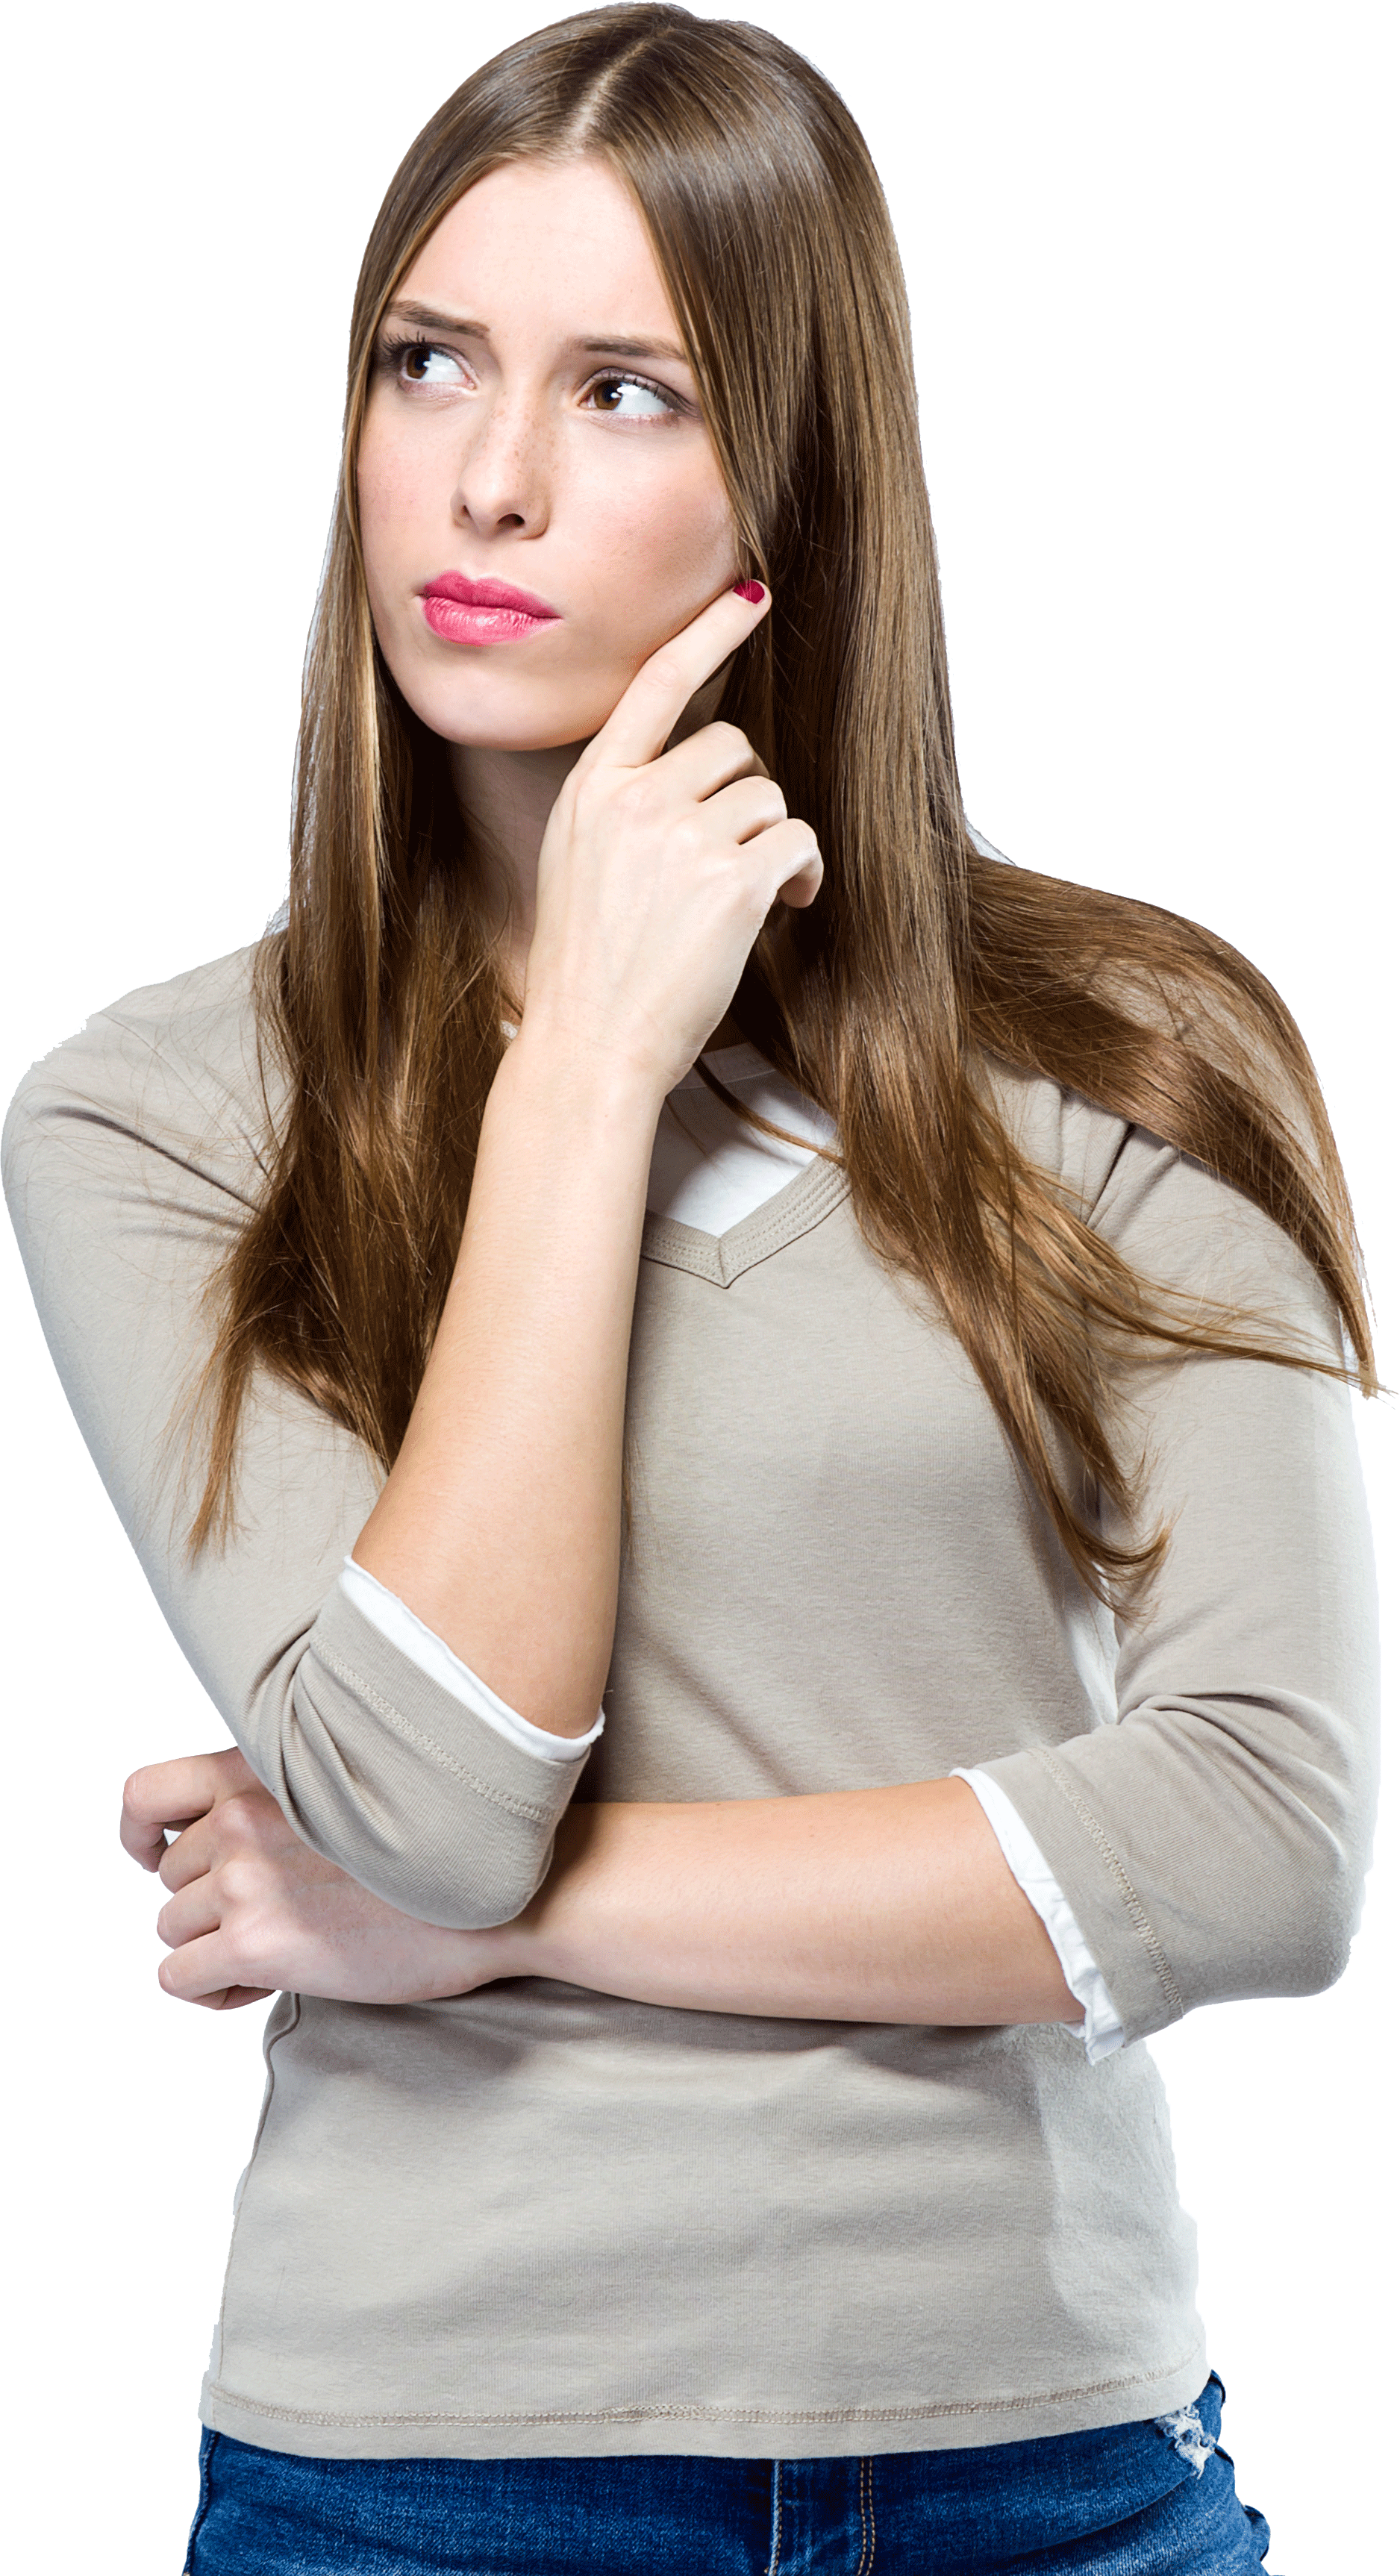 Thinking Woman PNG Pic